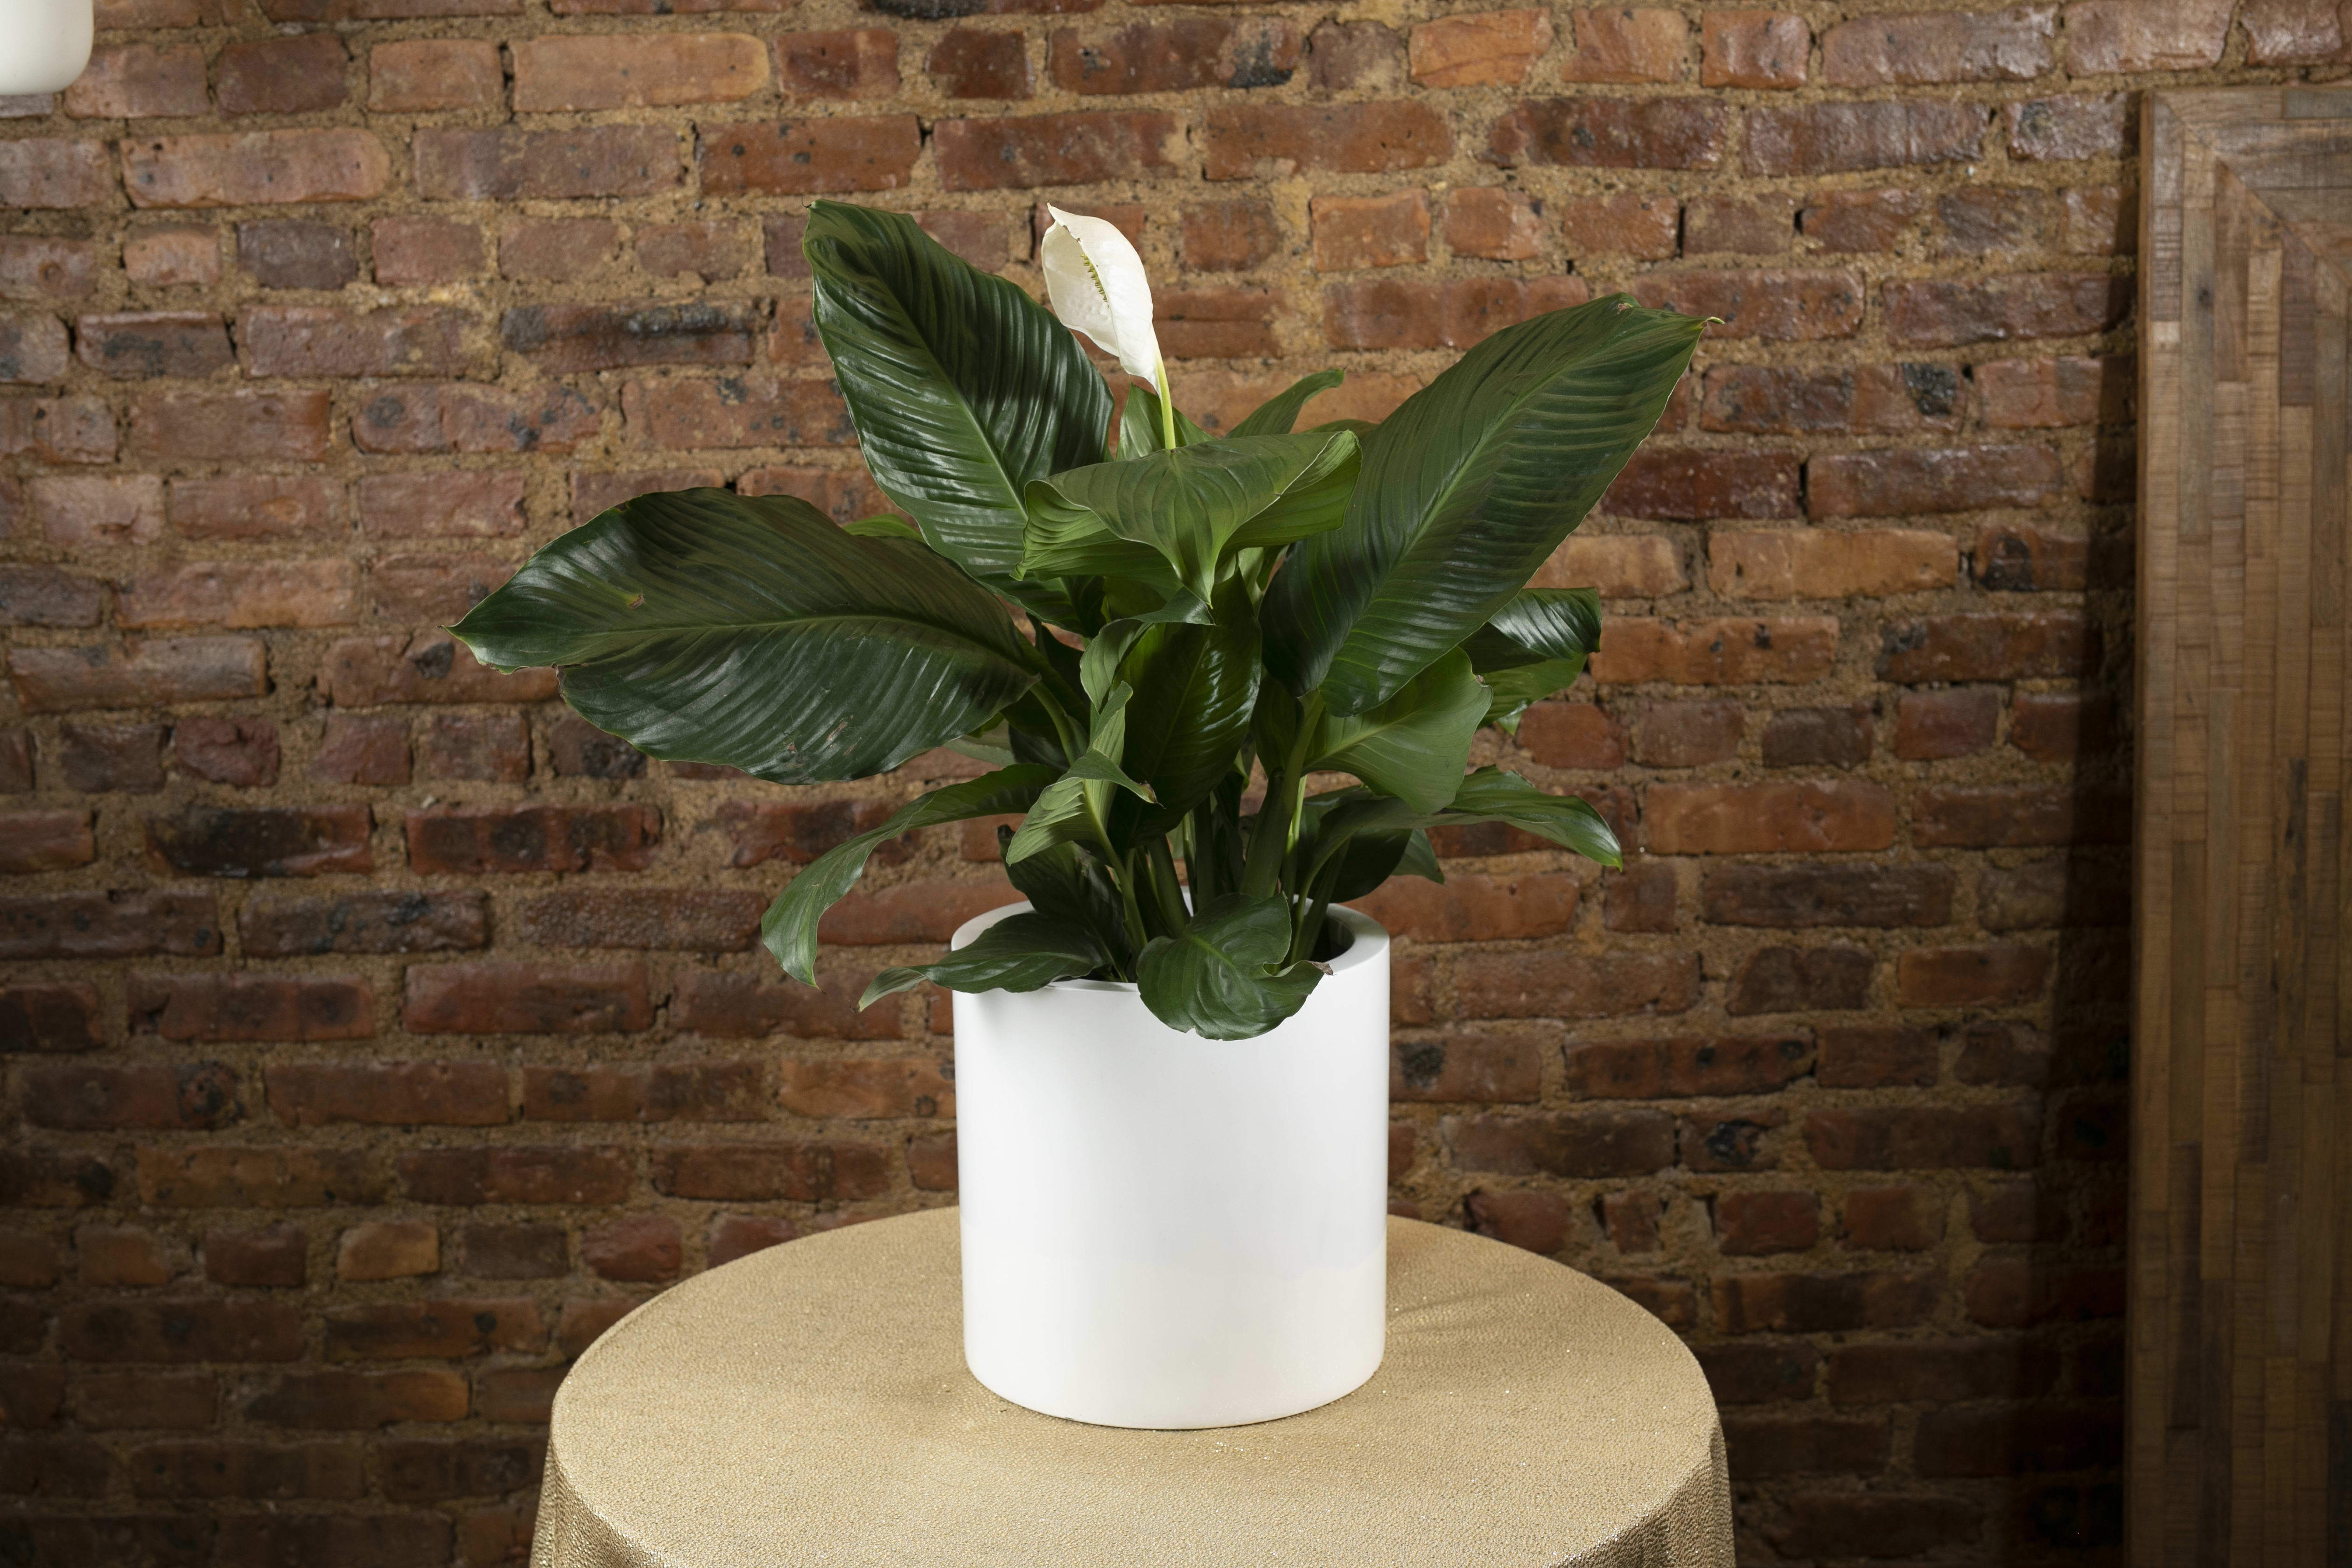 Large Spathiphyllum Plant (Peace Lily)  - Peace lilies are indisputably terrific as houseplants. Small varieties look attractive on a tabletop and bigger ones can occupy a nice-sized spot on the floor. They filter more indoor pollutants than most other plants, so are great for bedrooms or other frequented rooms. Inside the tropical plant's pores, toxic gases like carbon monoxide and formaldehyde are broken down and neutralized.  Plant Size: 12&quot;W x 24&quot;H  (please note these are approximate size may be larger or shorter depending on leaf size)